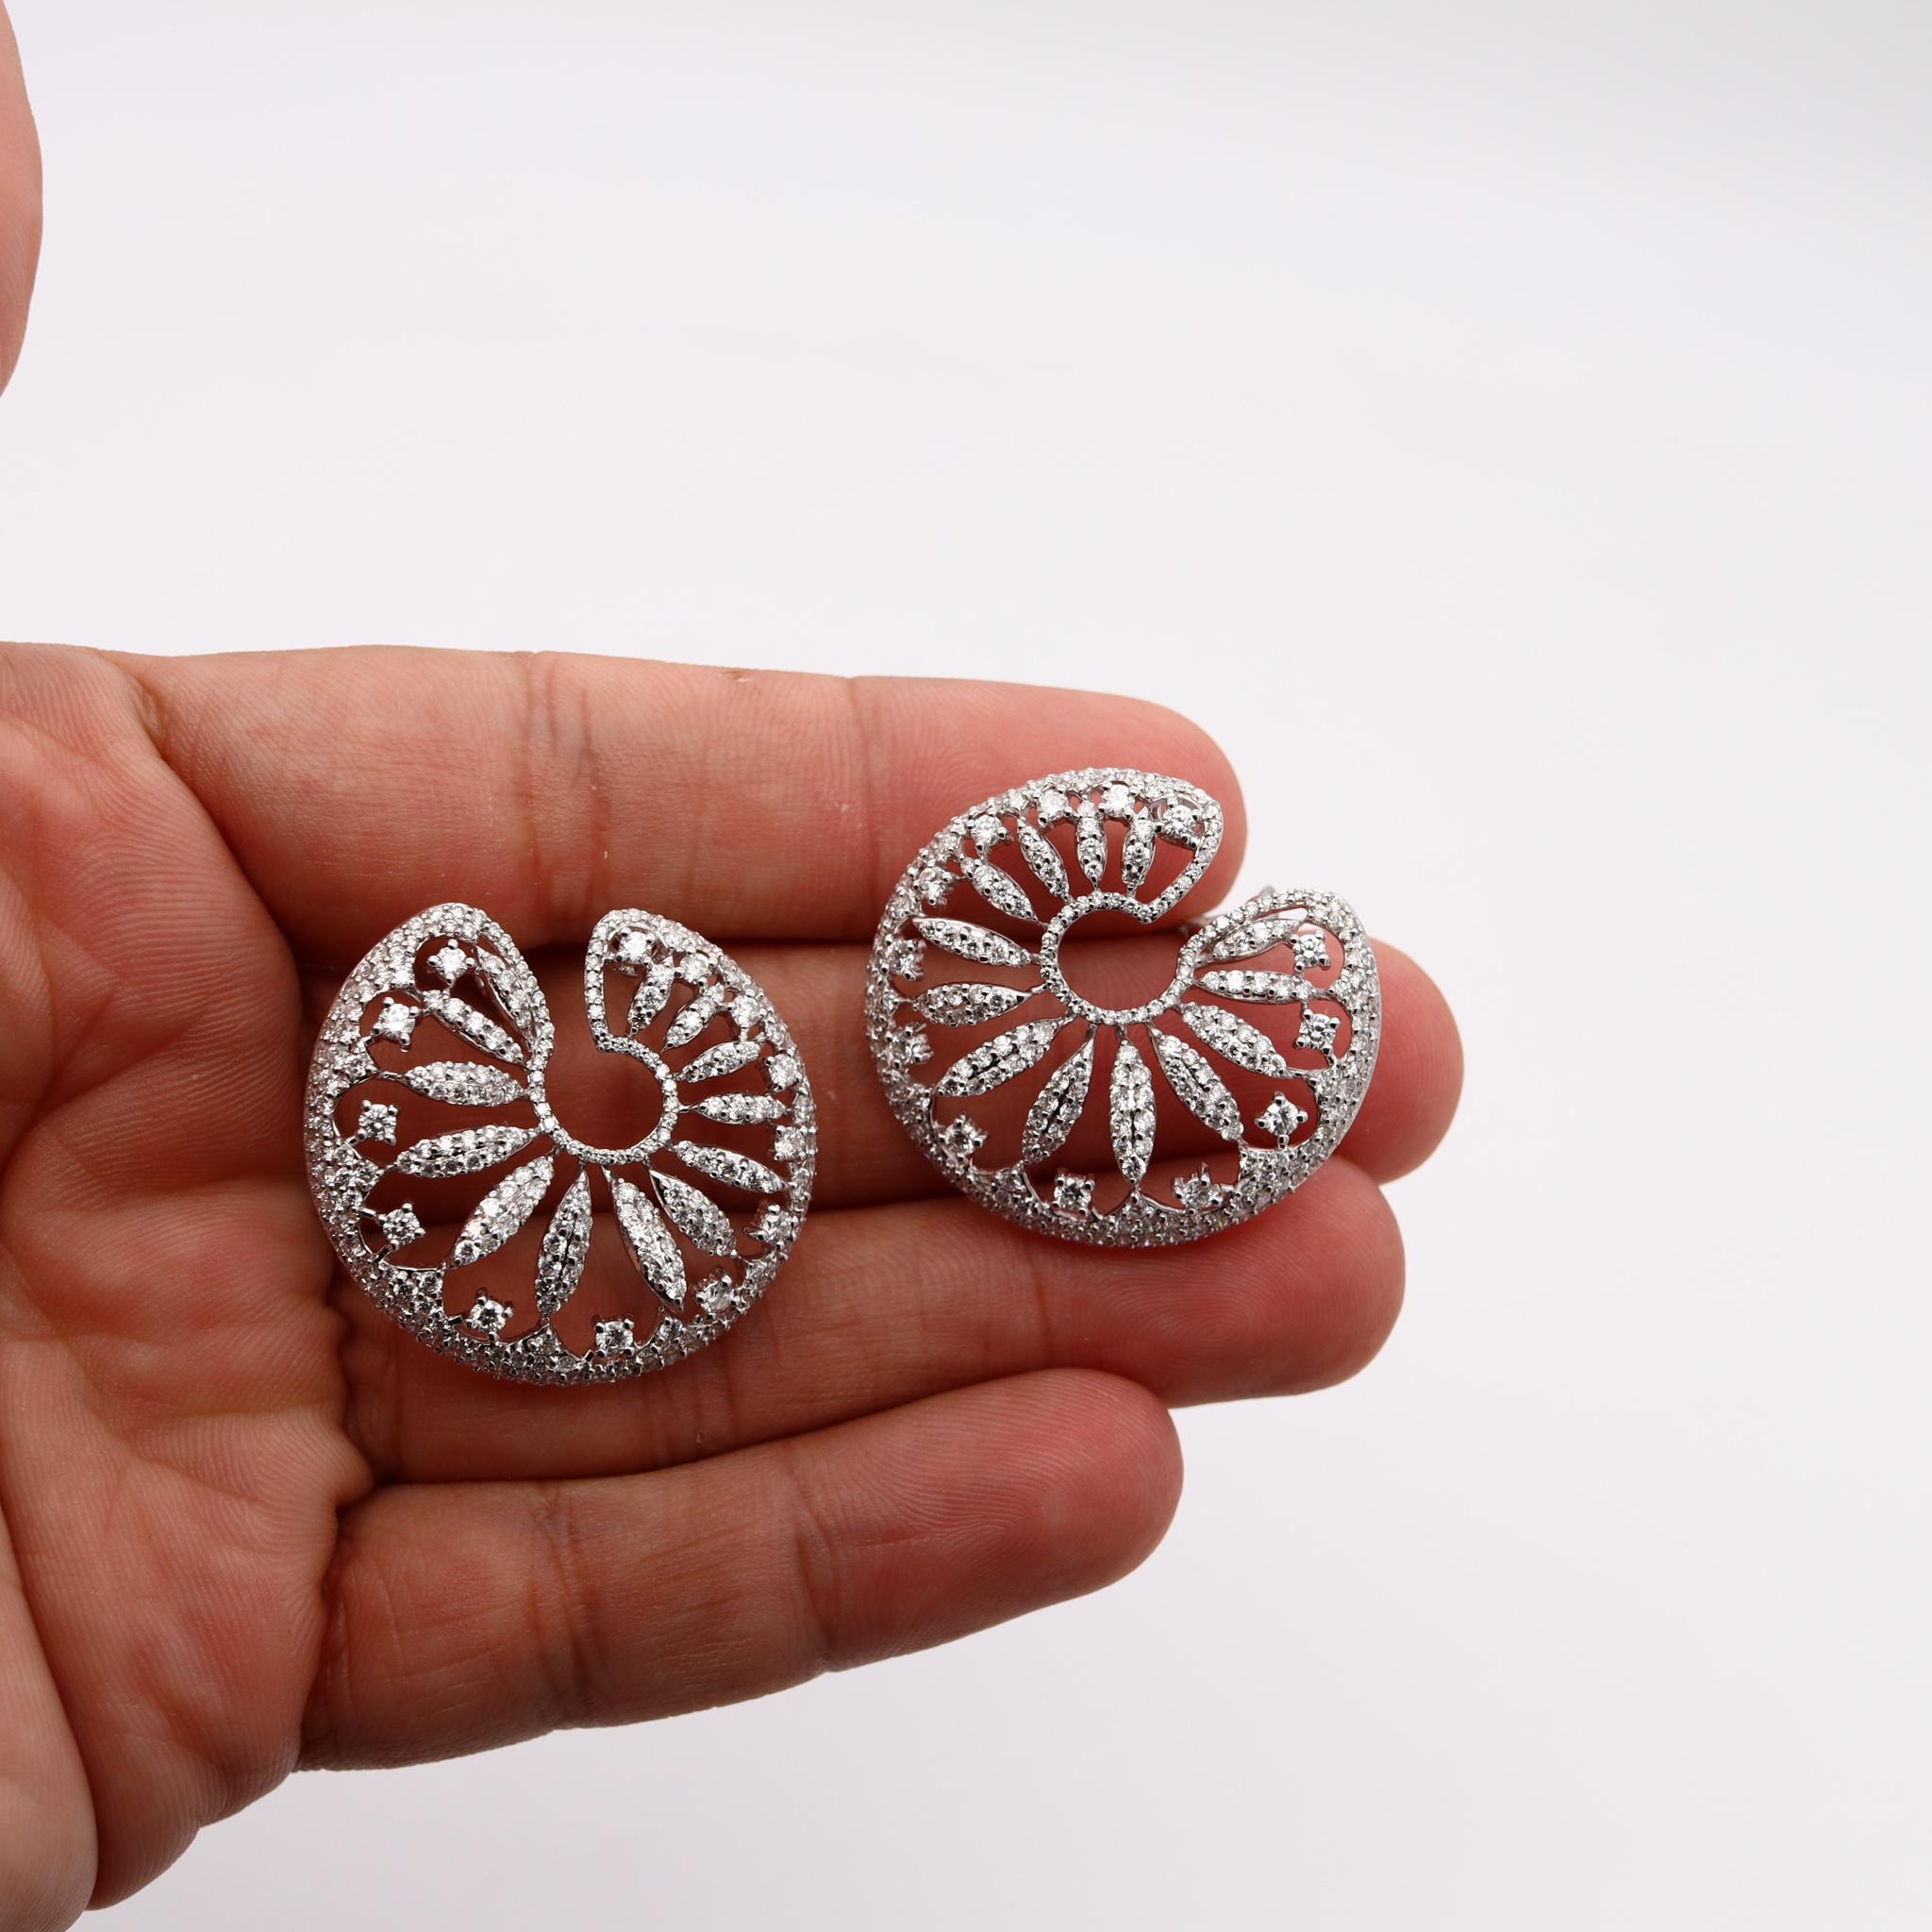 Exceptional pair of clips earrings designed by Salavetti. 

Gorgeous one-of-a-kind pair created in Milan, Italy by the jewelry house of Salavetti. They are crafted, with intricate patterns in solid white gold of 18 karat and suited with European